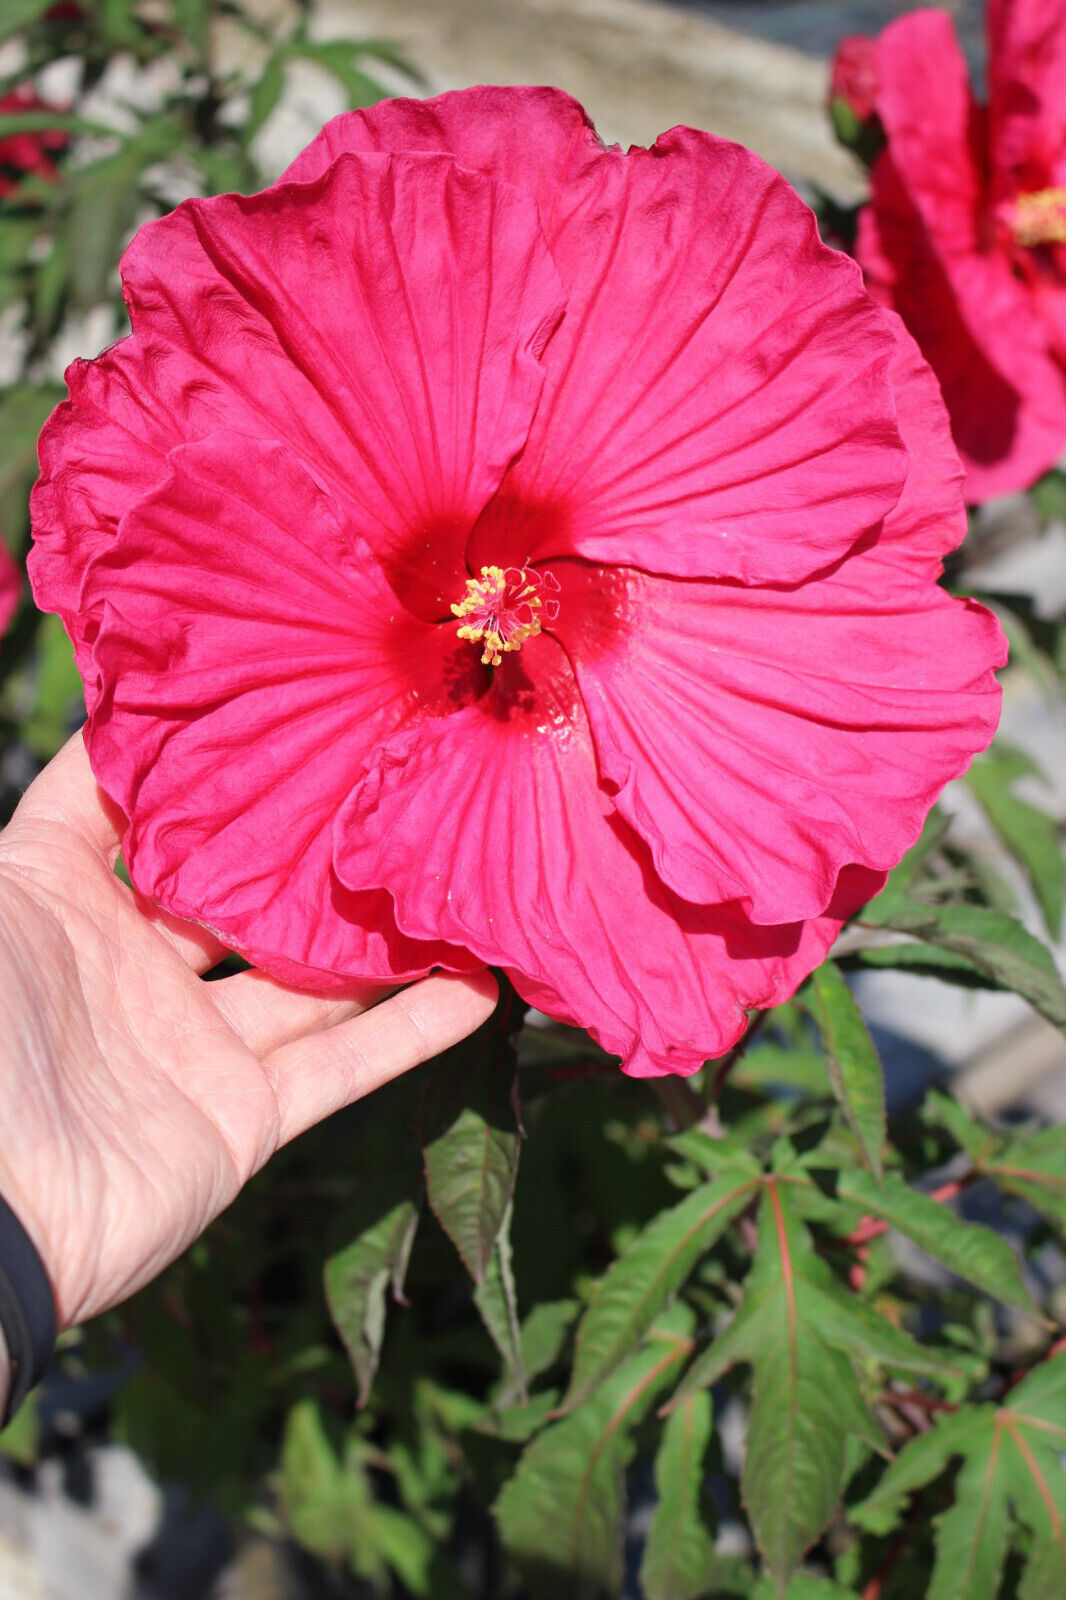 HIBISCUS 'SUMMER IN PARADISE' ROSE MALLOW PLANT 7-8" PINK FLOWERS HARDY ZONE 4-9